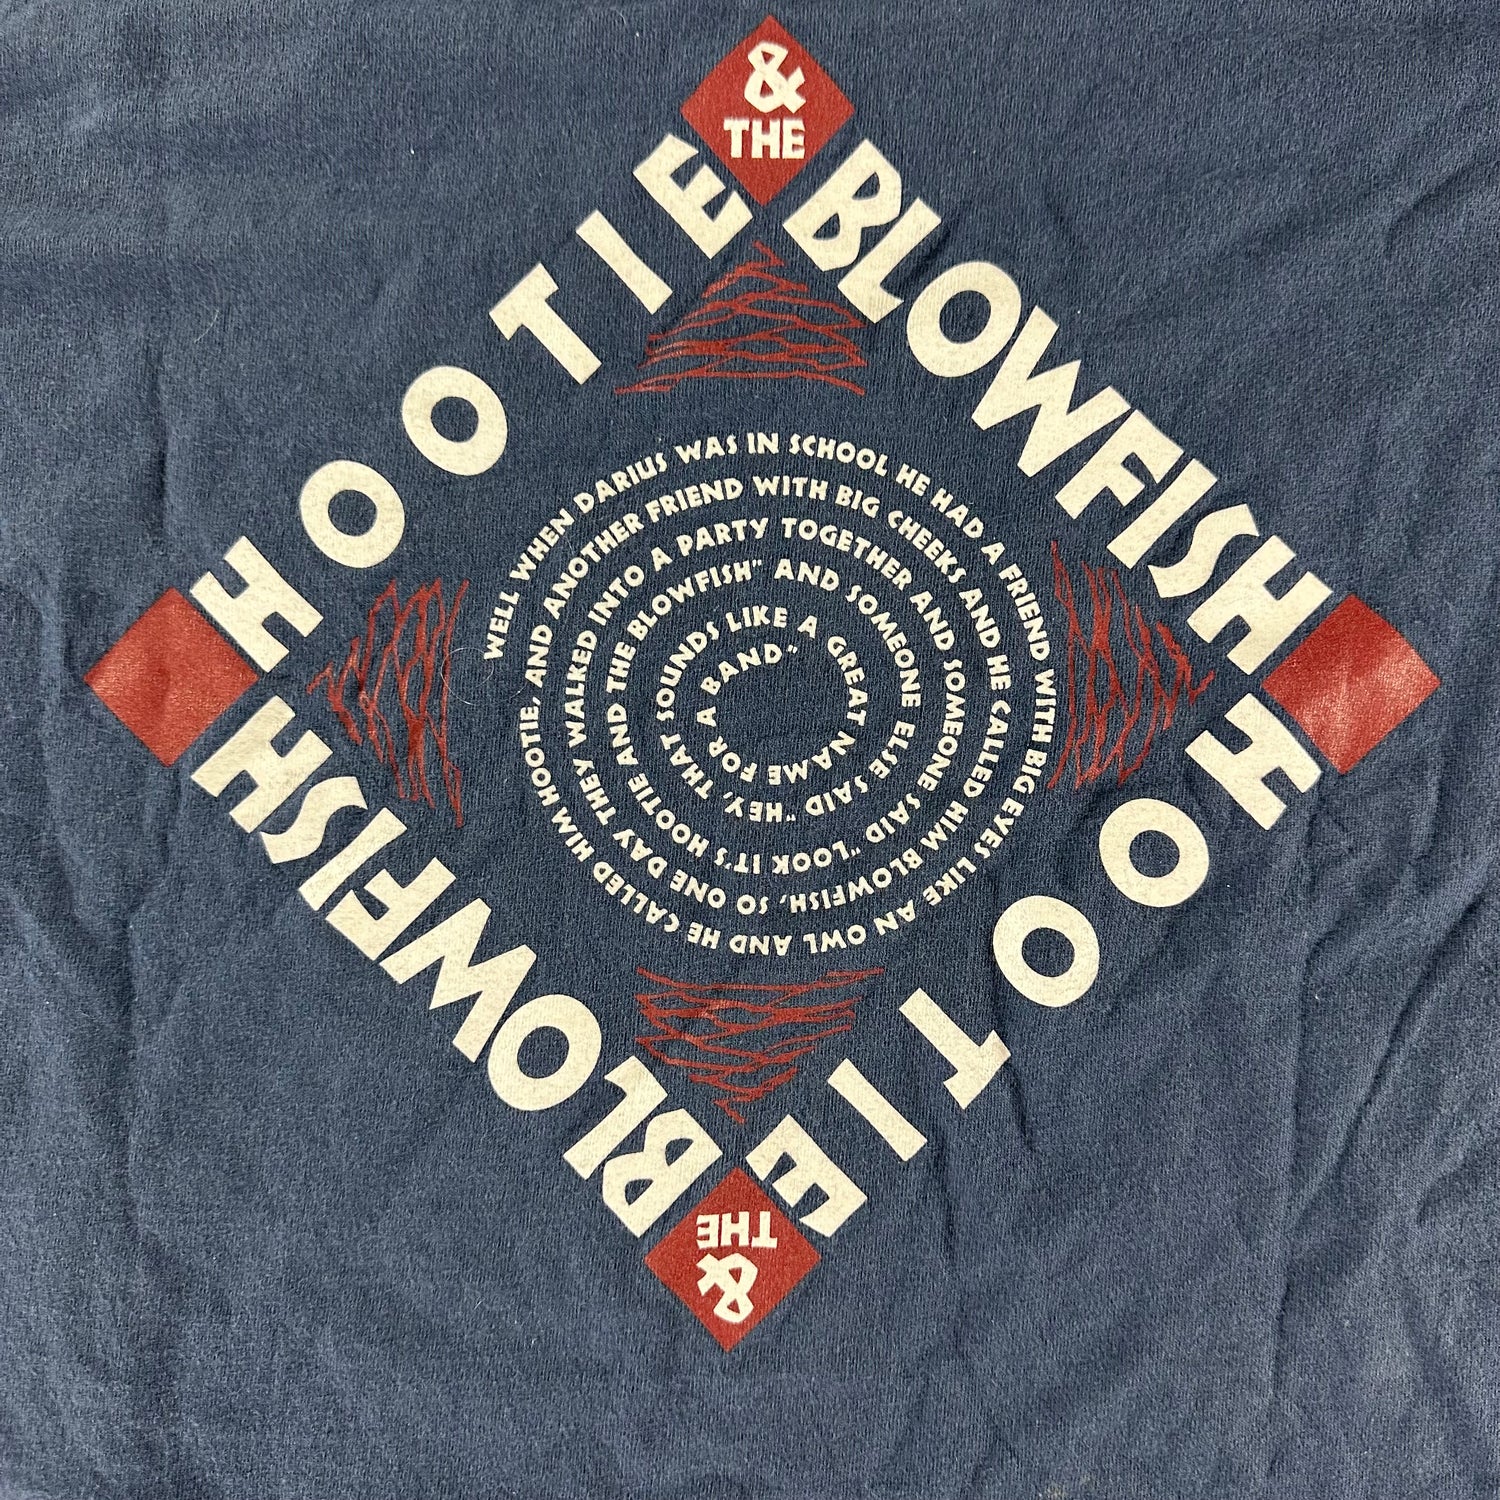 Vintage 1990s Hootie and the Blowfish T-shirt size XL